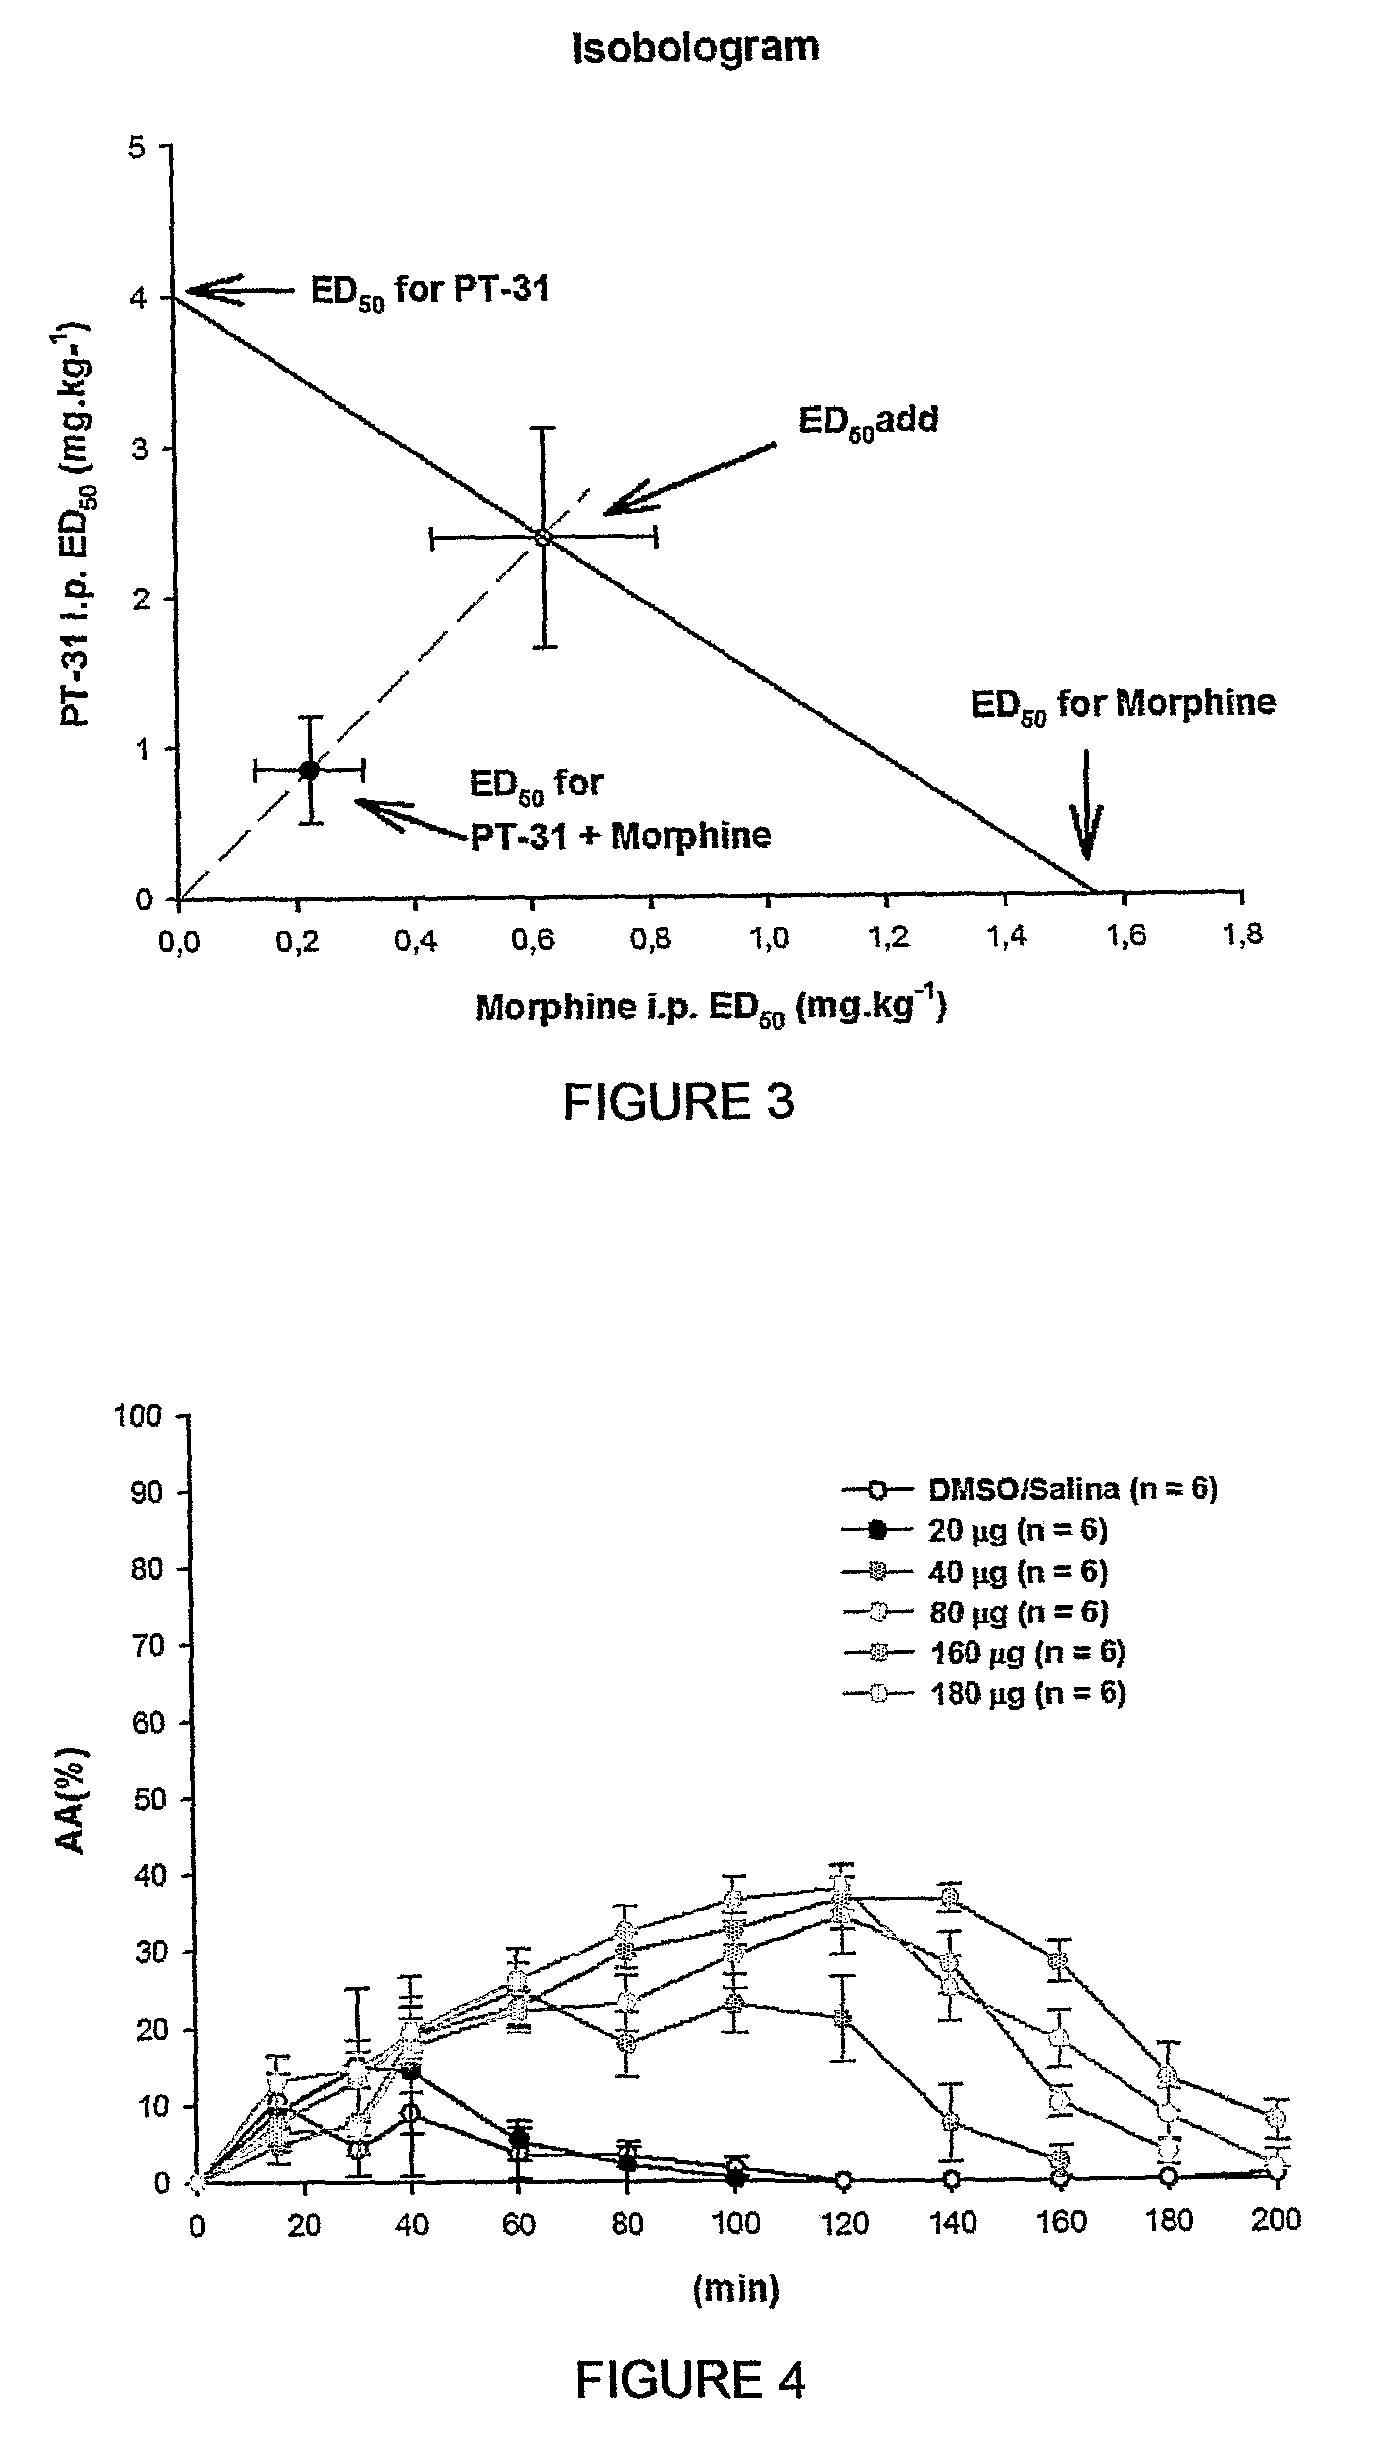 Compound with anesthetics activity, methods for its production and pharmaceutical compositions comprising the same